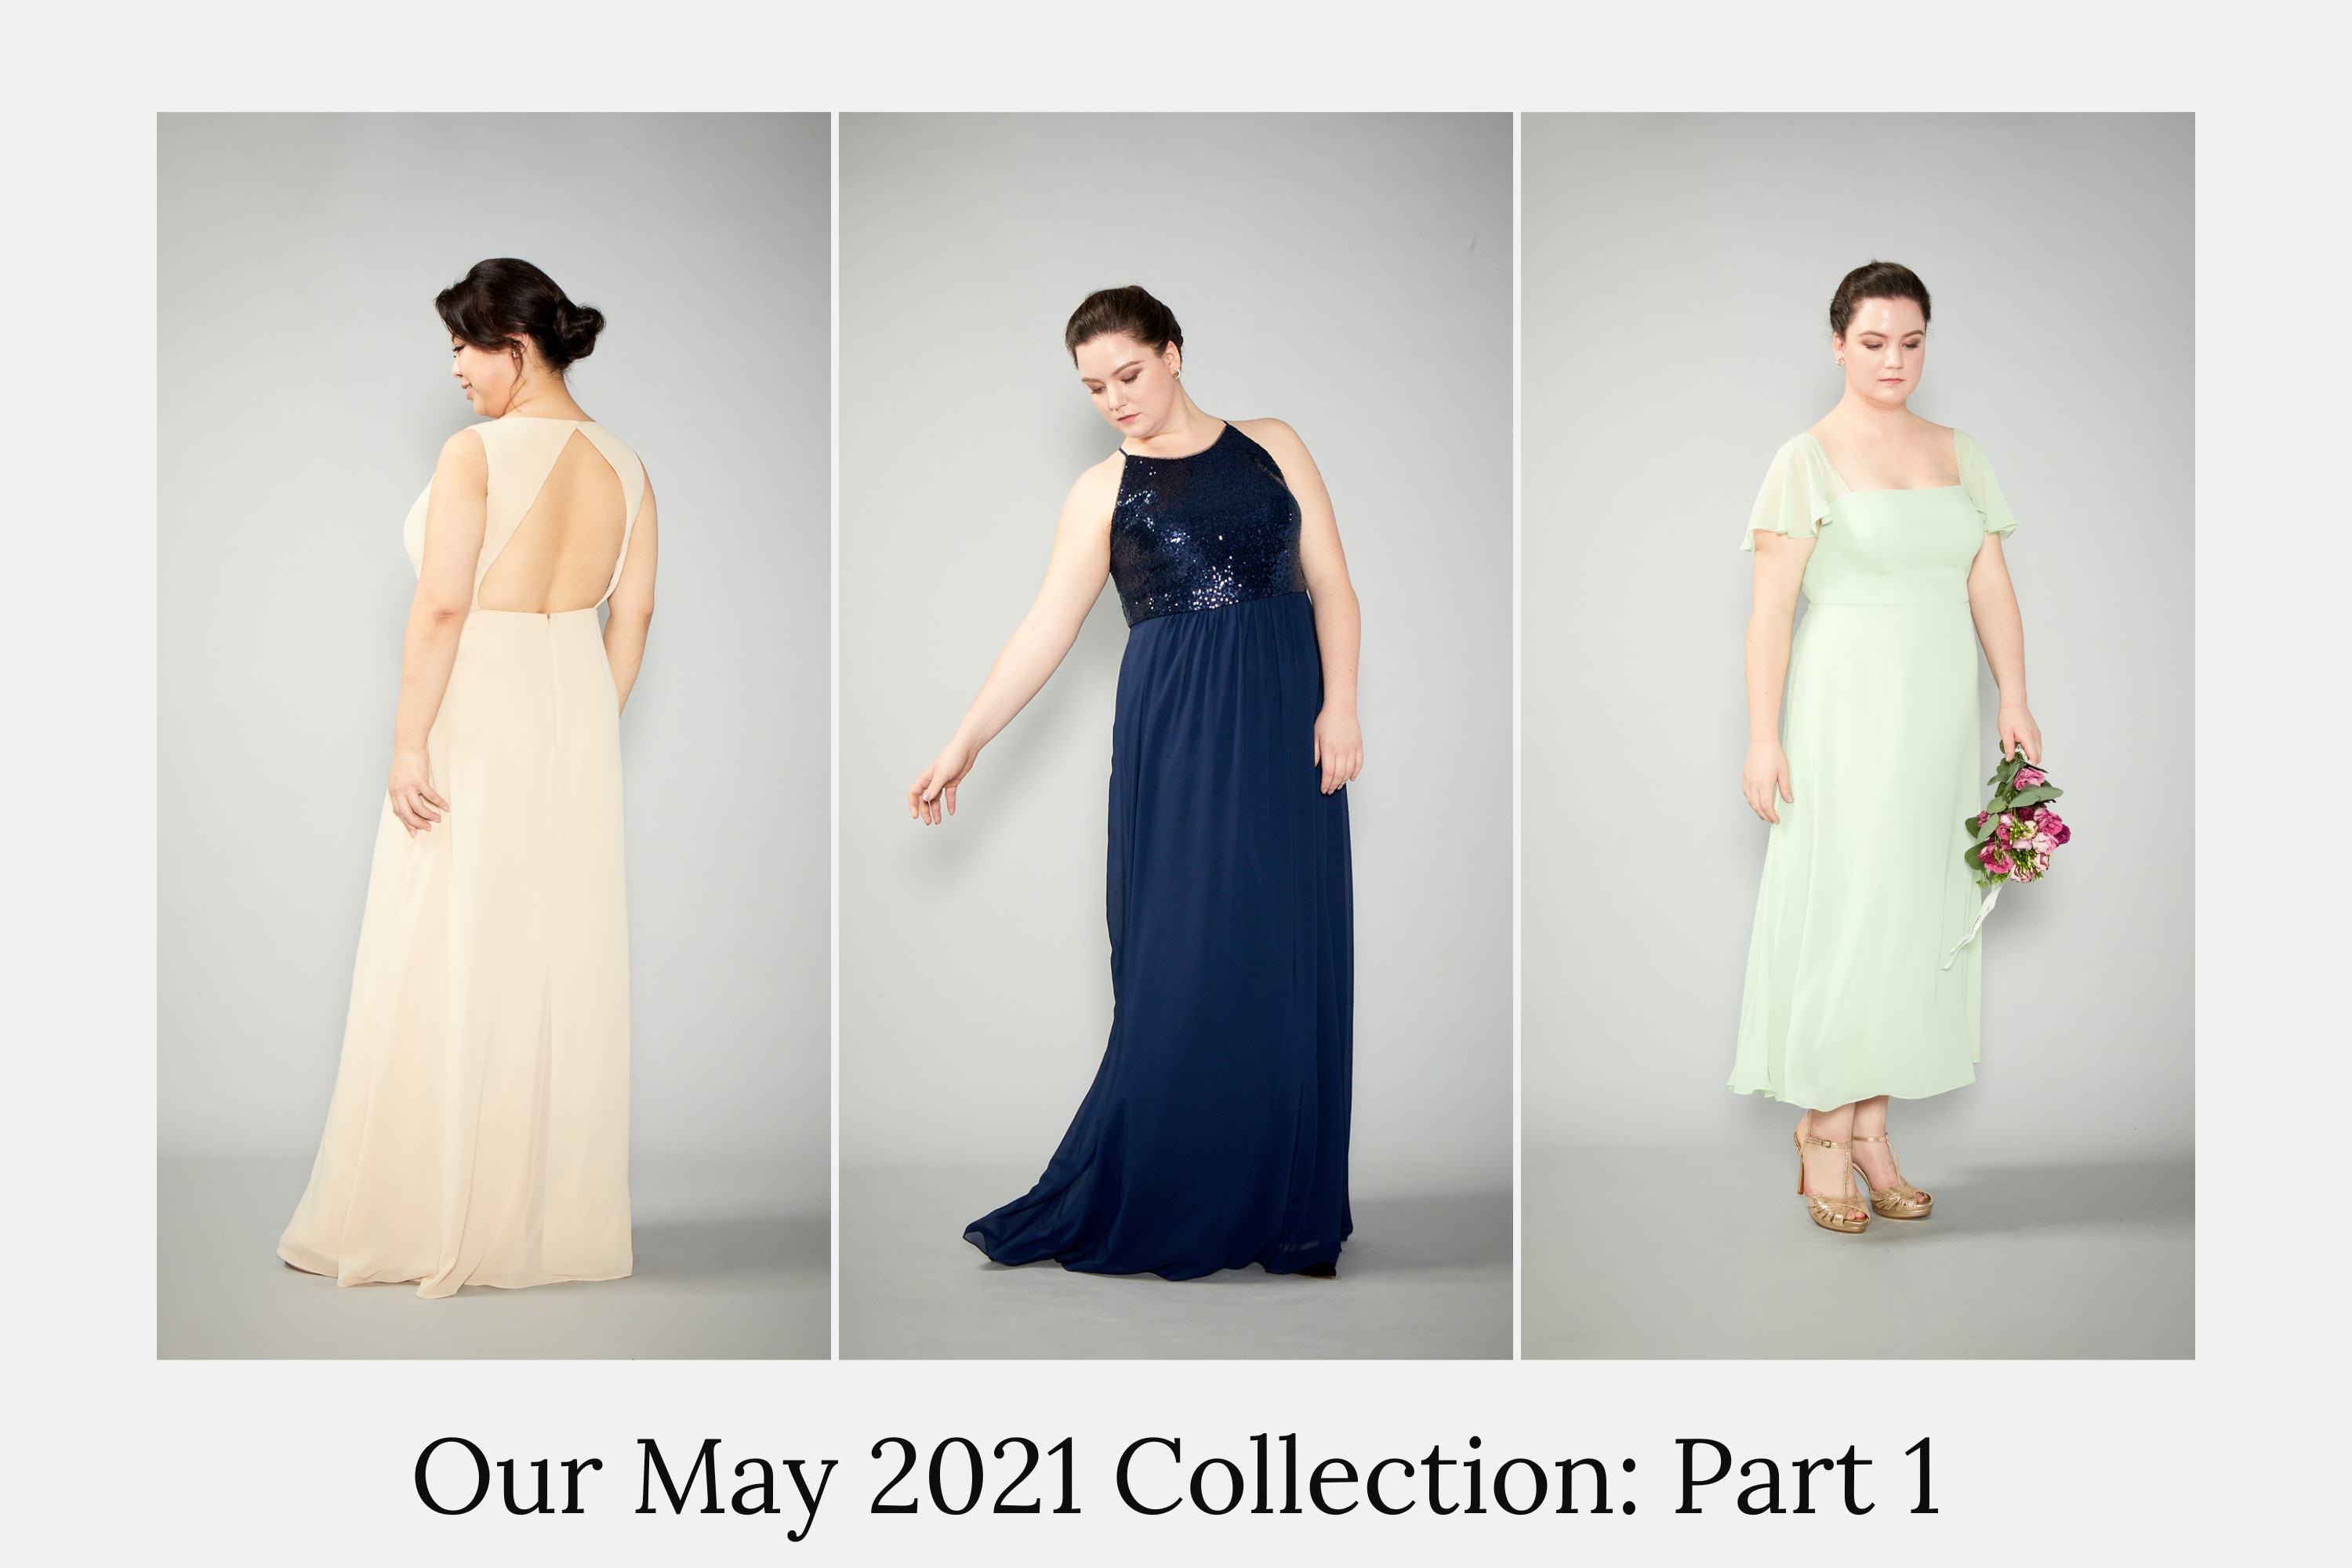 Meet Our May Collection: Part 1